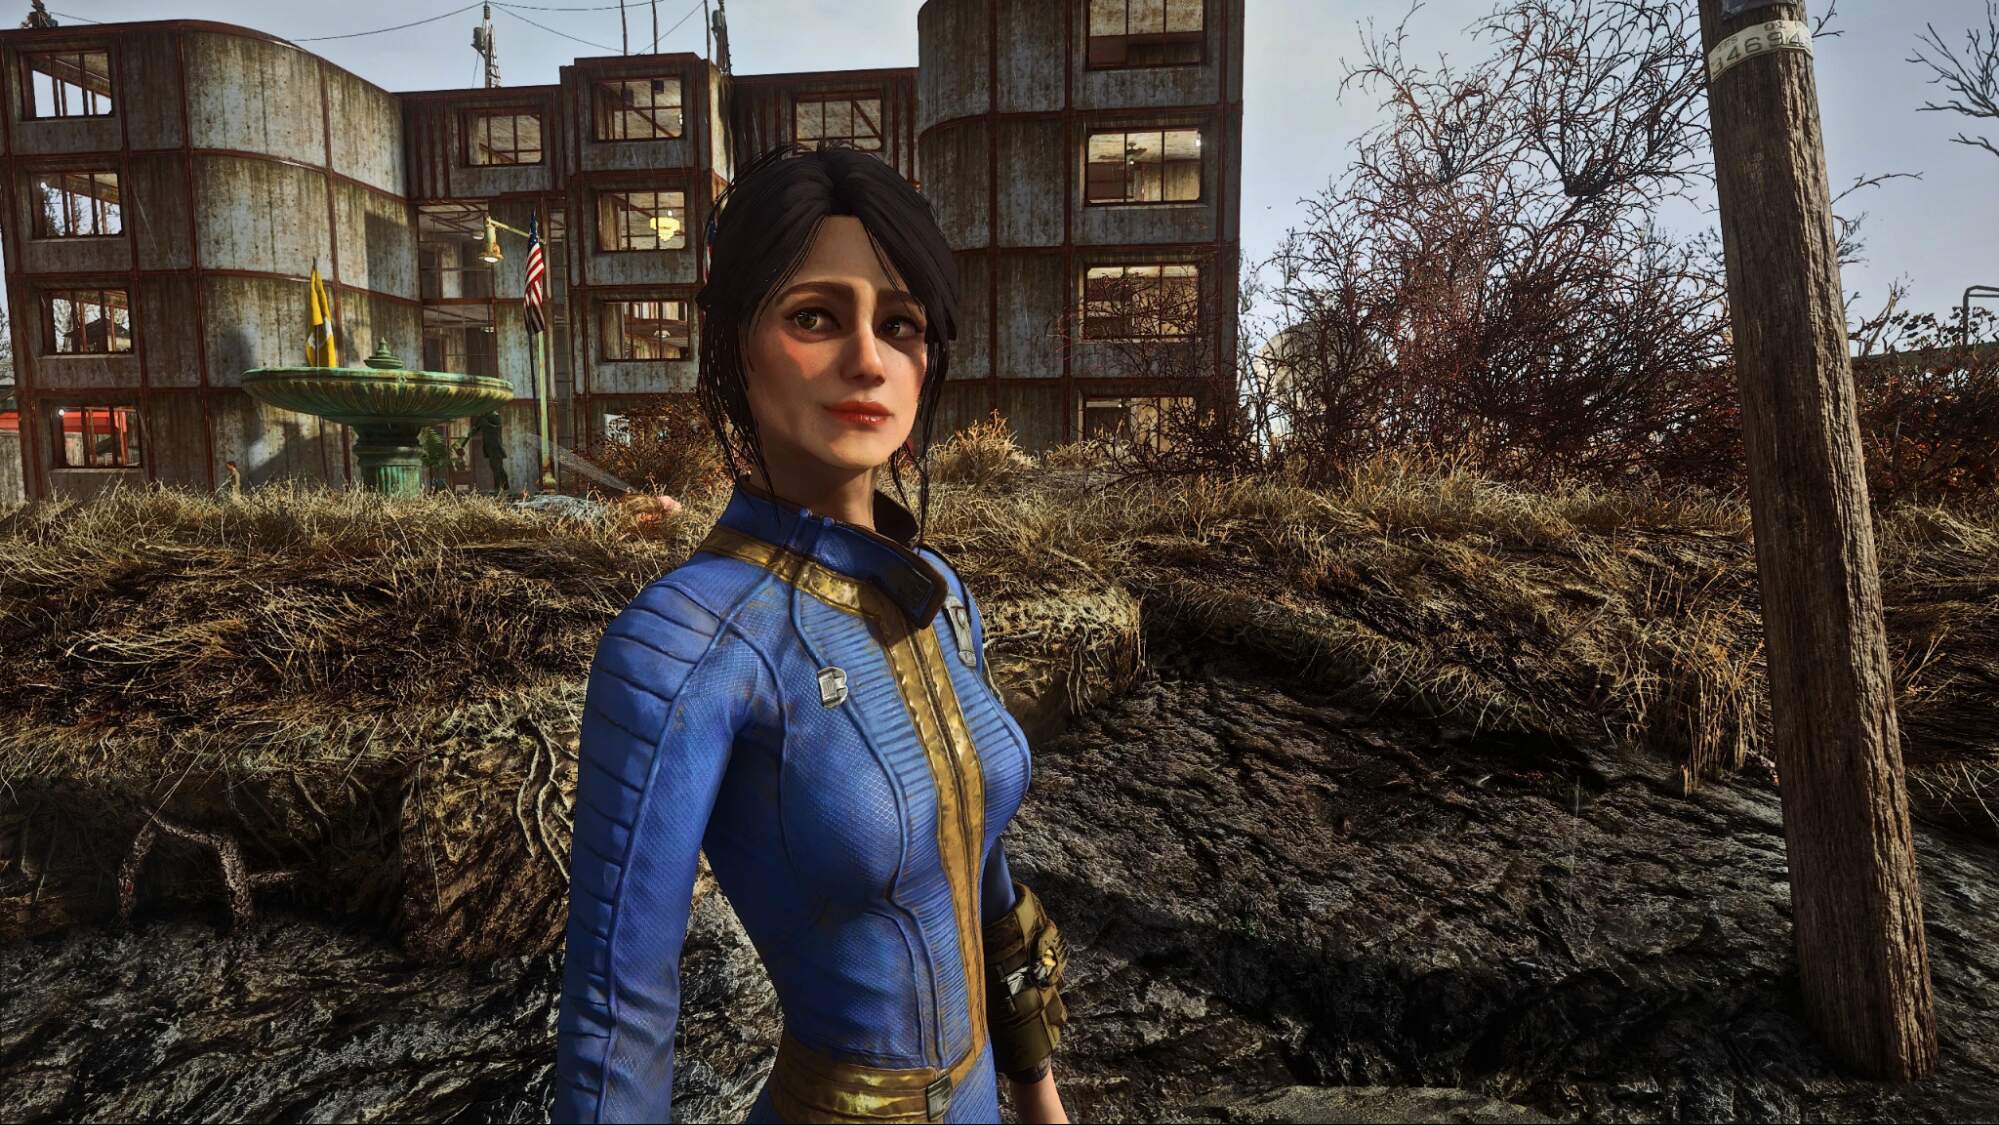 Best Mods for Fallout 4 from the Fallout Series - Model Lucy from the Fallout Series - Lucy's Appearance